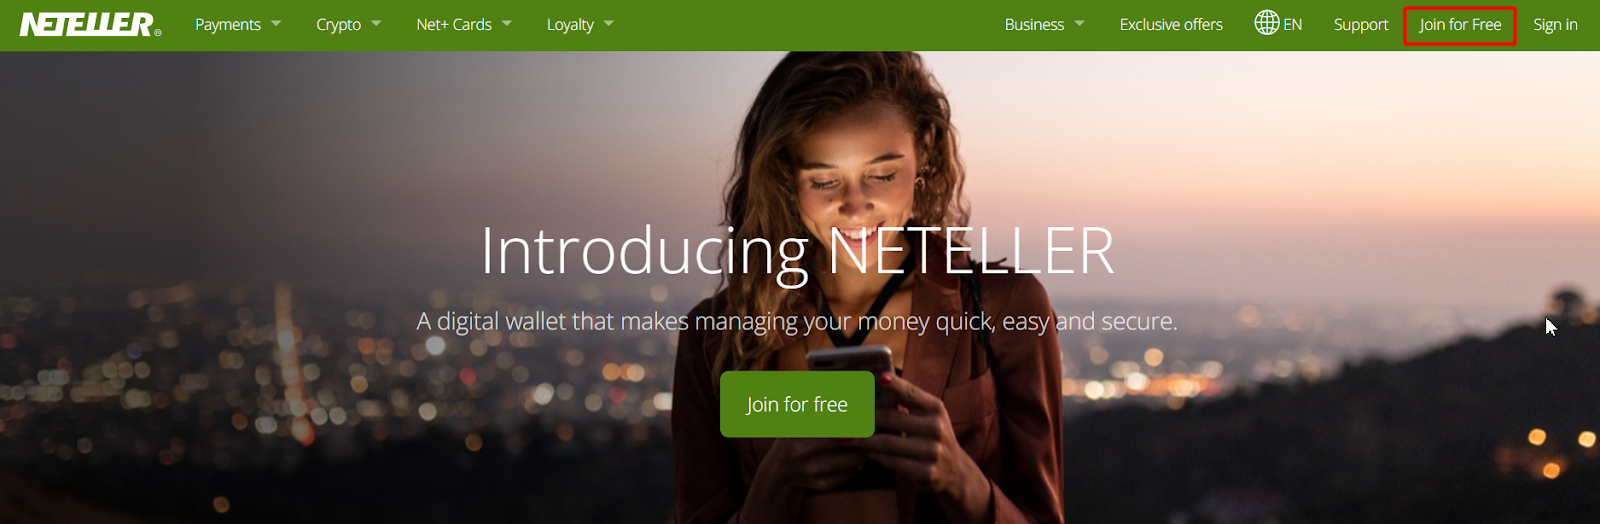 How to open an account at Neteller - Join for Free